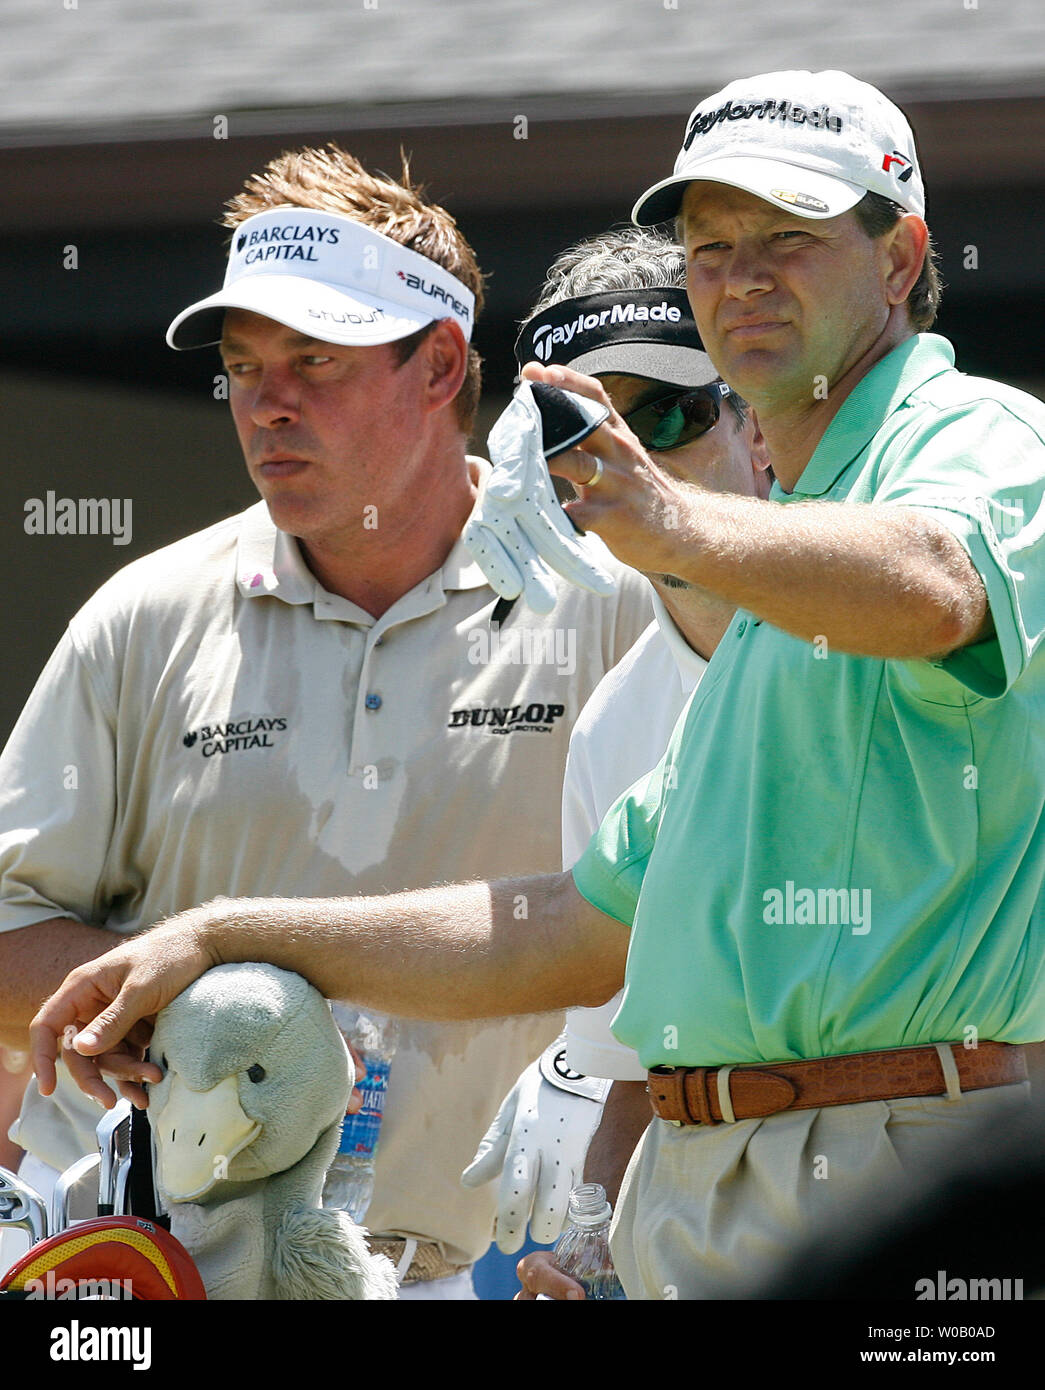 South Africa's Retief Goosen (R) looks down the fairway on the first hole with Northern Ireland's Darren Clarke standing by as play sets to begin in the second  round of the 89th PGA Championship at Southern Hills Country Club in Tulsa, Oklahoma on August 10, 2007.   (UPI Photo/Gary C. Caskey) Stock Photo